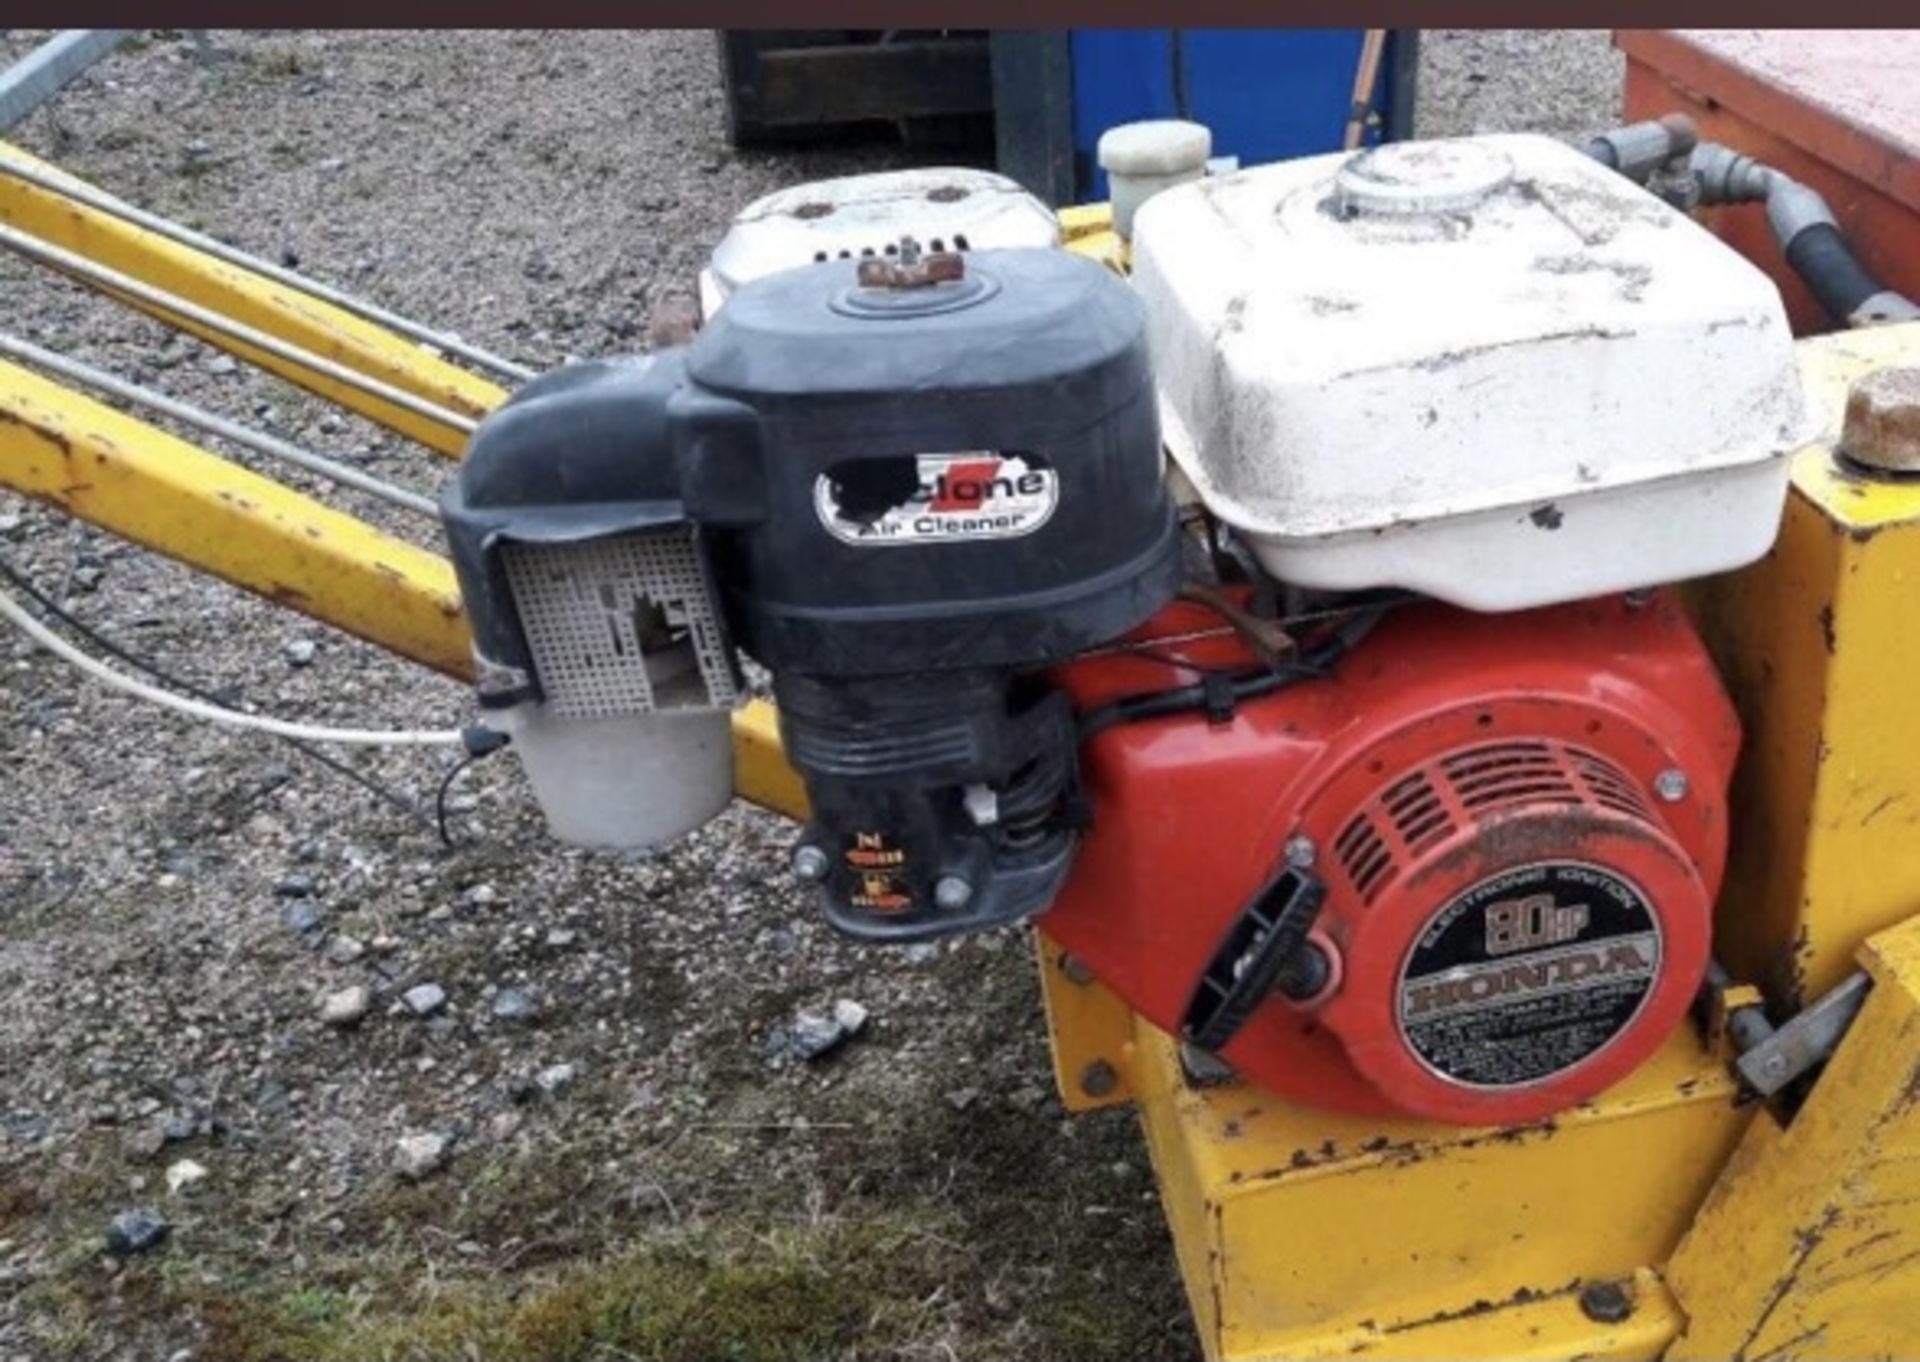 BLEC SEEDER HONDA PETROL ENGINE WITH COMACTION PLATE.LOCATION NORTHERN IRELAND. - Image 4 of 4